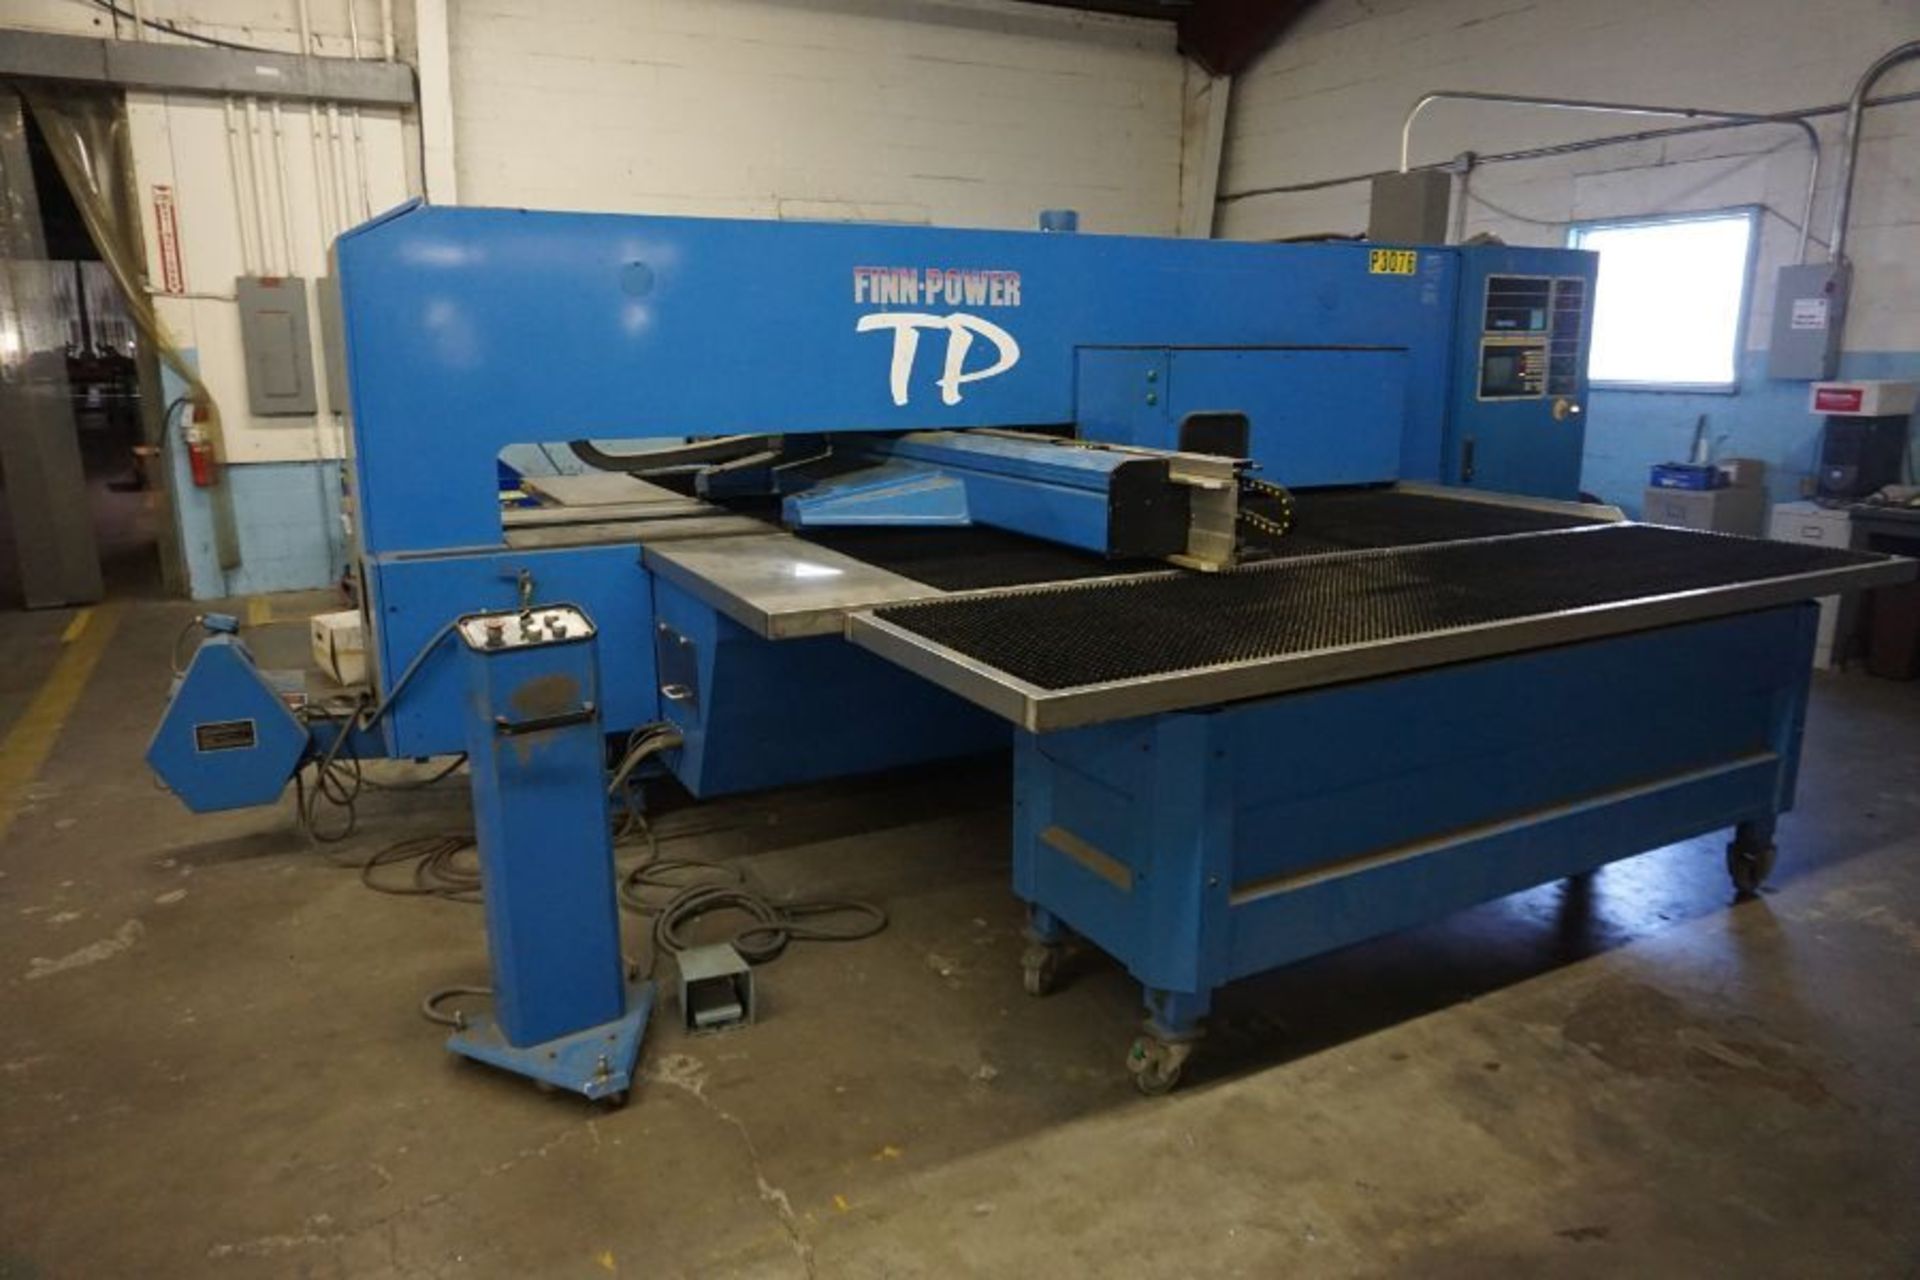 1996 FinnPower TP 2520 CNC Turret Punch, 33 Ton, 50"x100" Sheet Size *Auctioned from Edgerton, KS* - Image 2 of 9